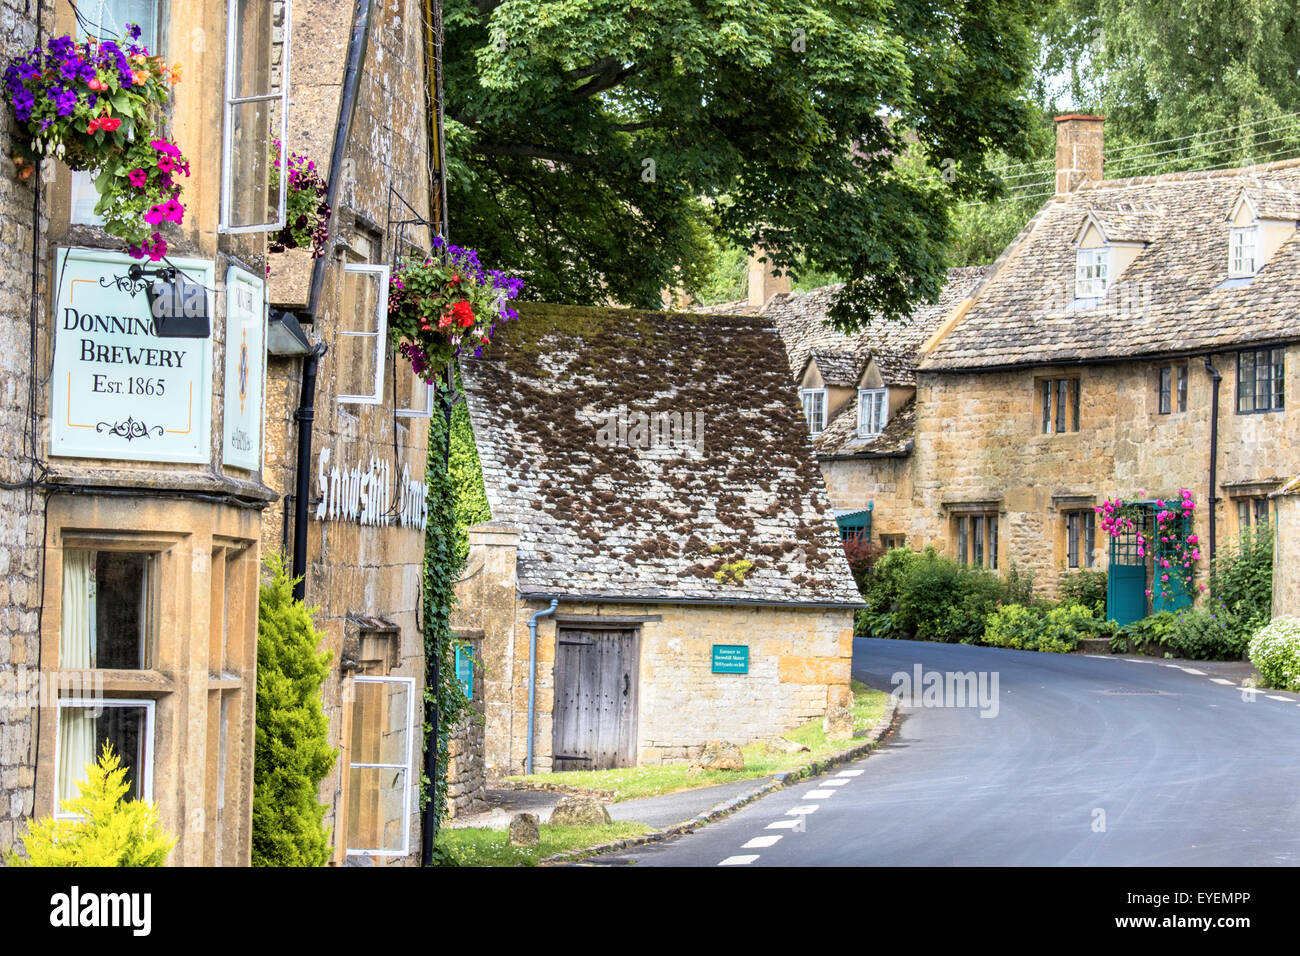 The Cotswold village of Snowshill, Gloucestershire, England, UK Stock Photo